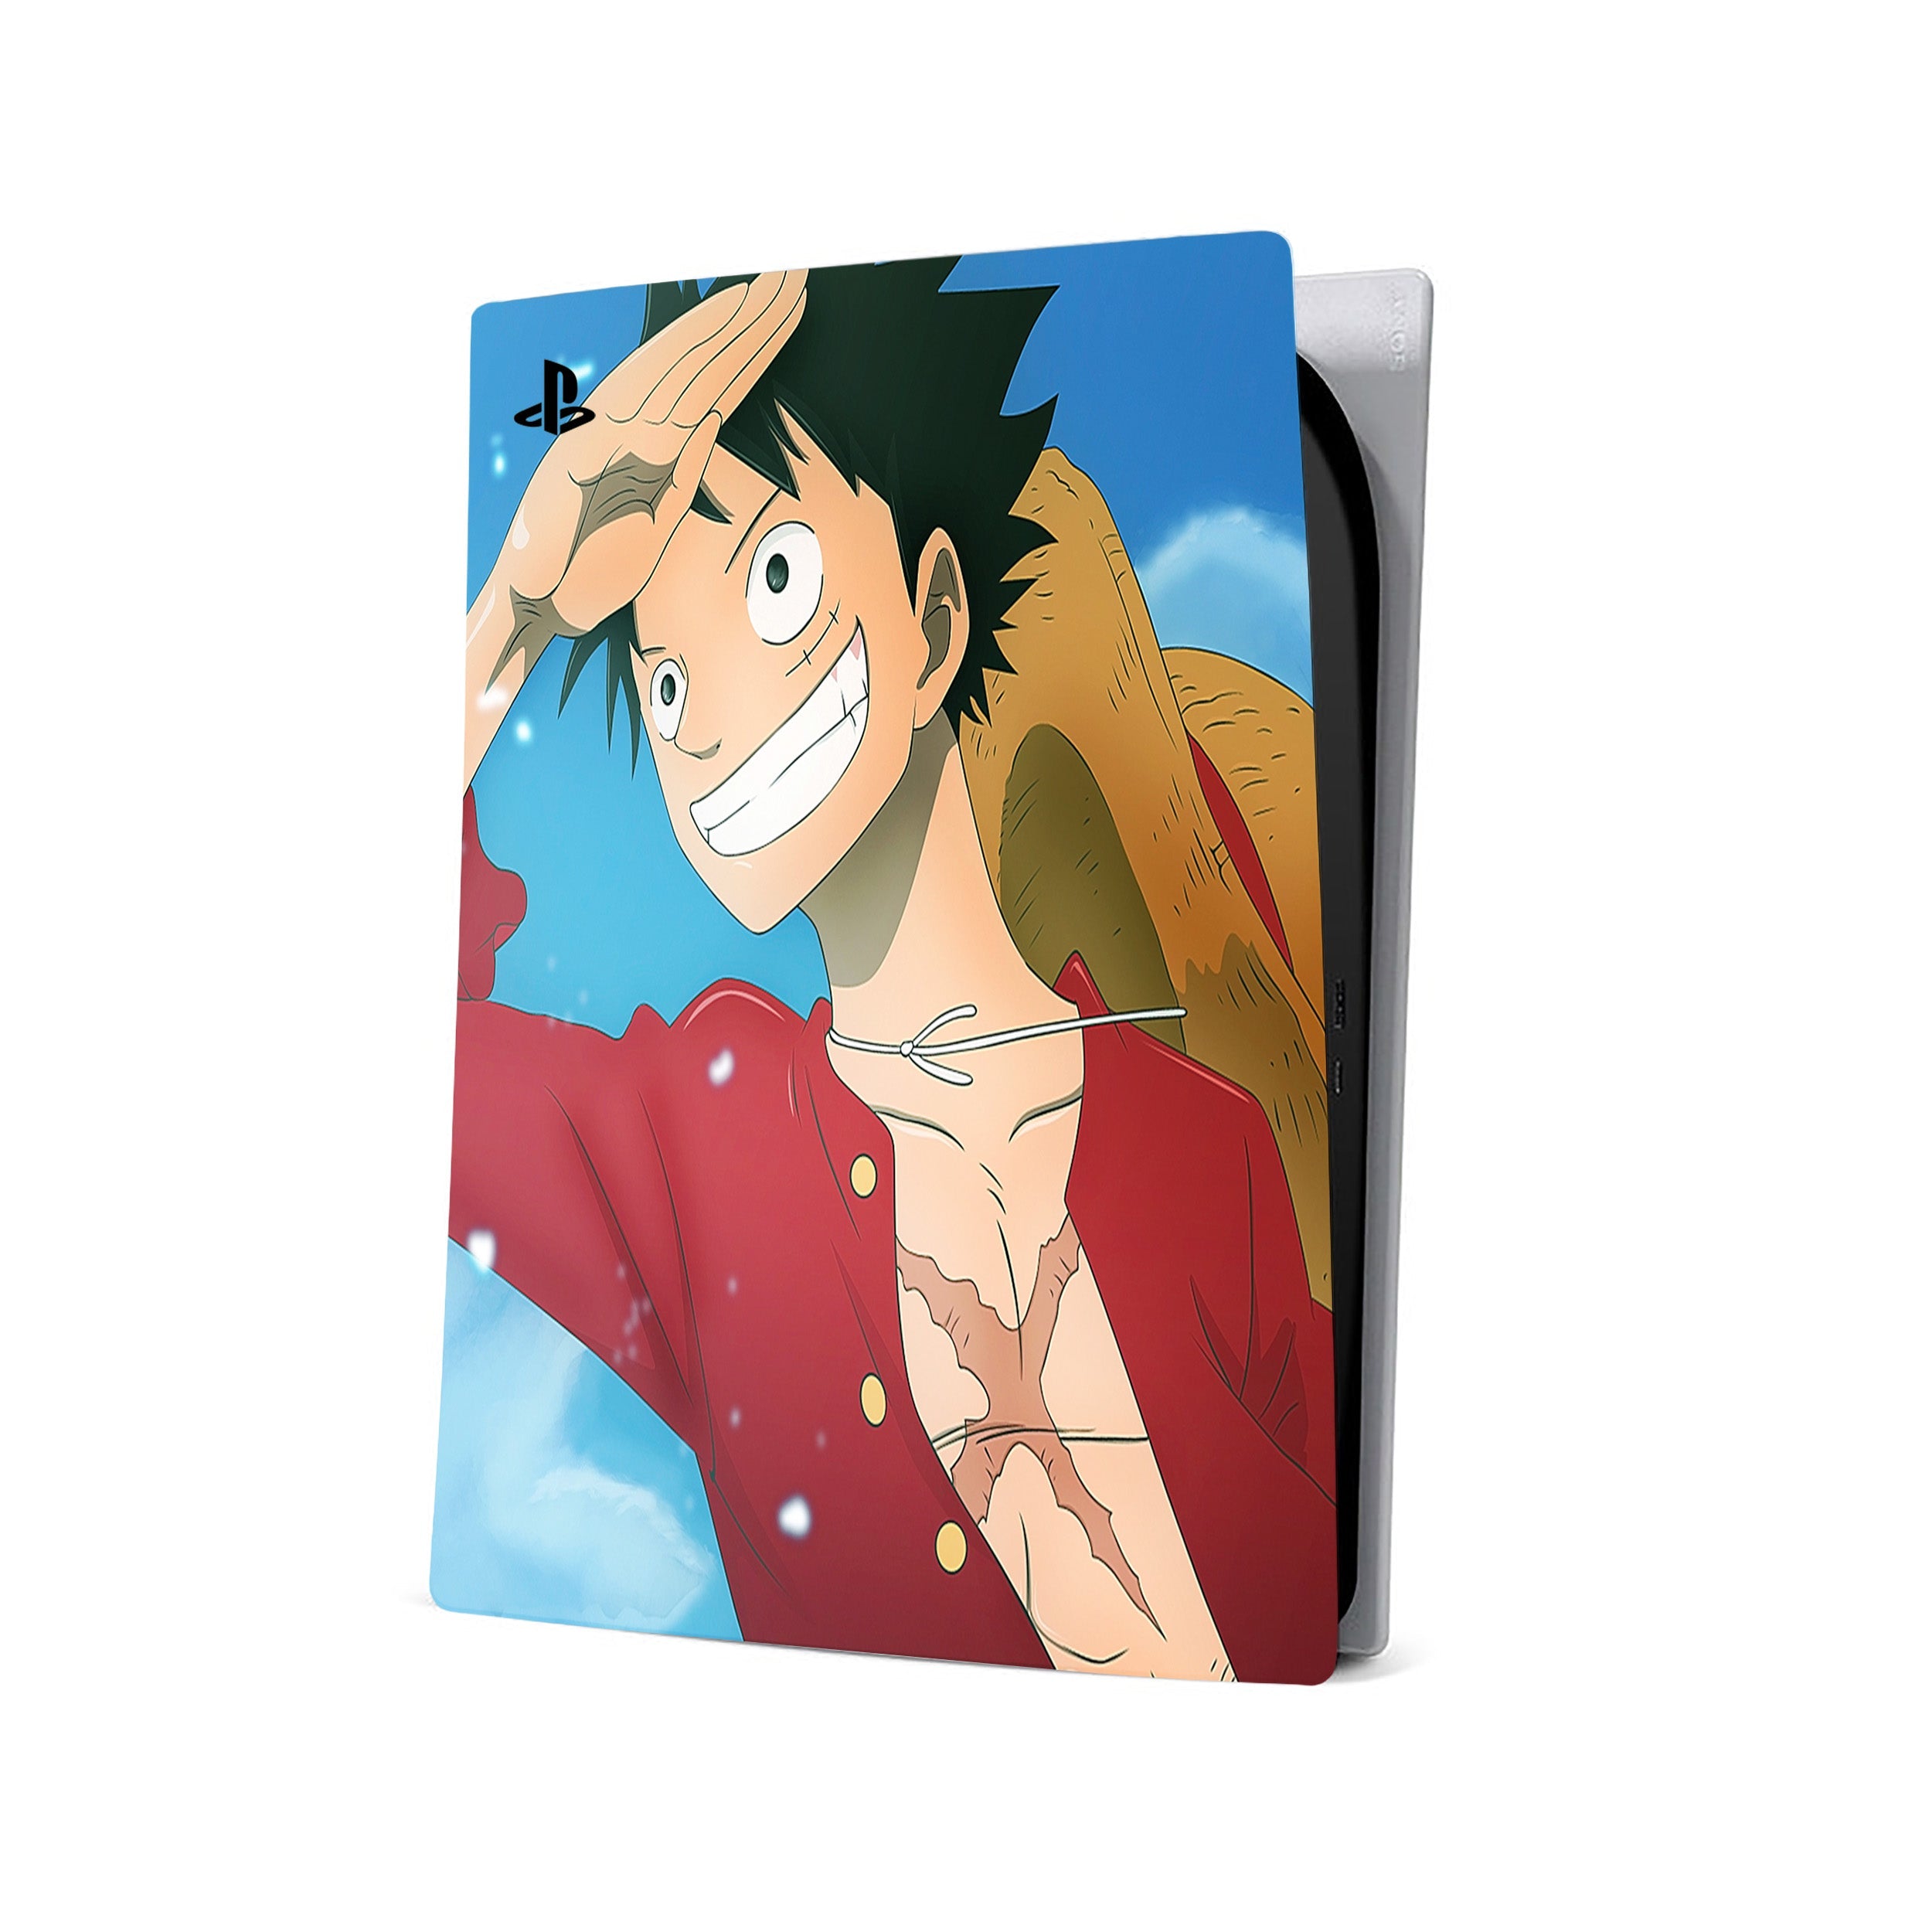 A video game skin featuring a One Piece Monkey D Luffy design for the PS5.